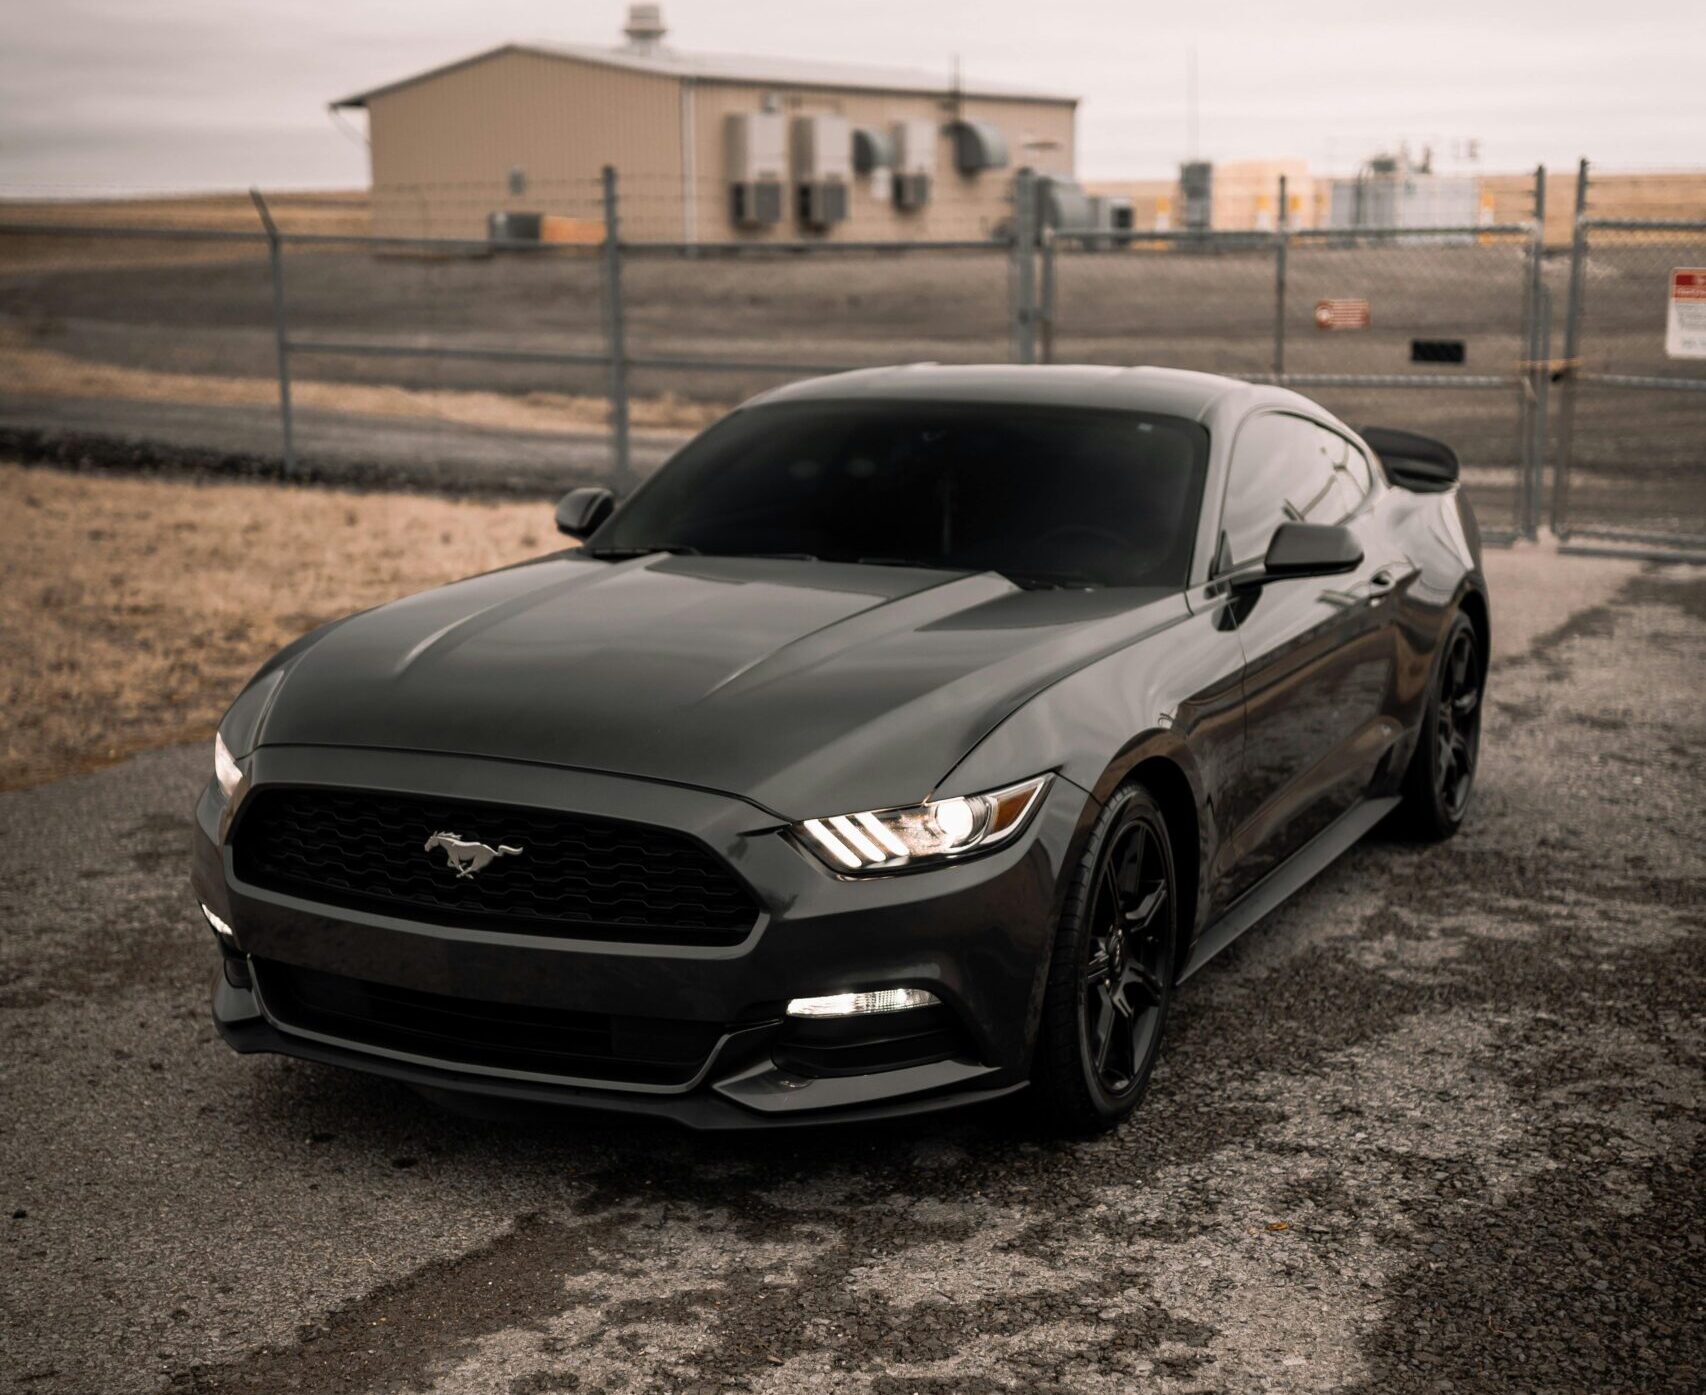 Ford Mustang Car Price in Nigeria